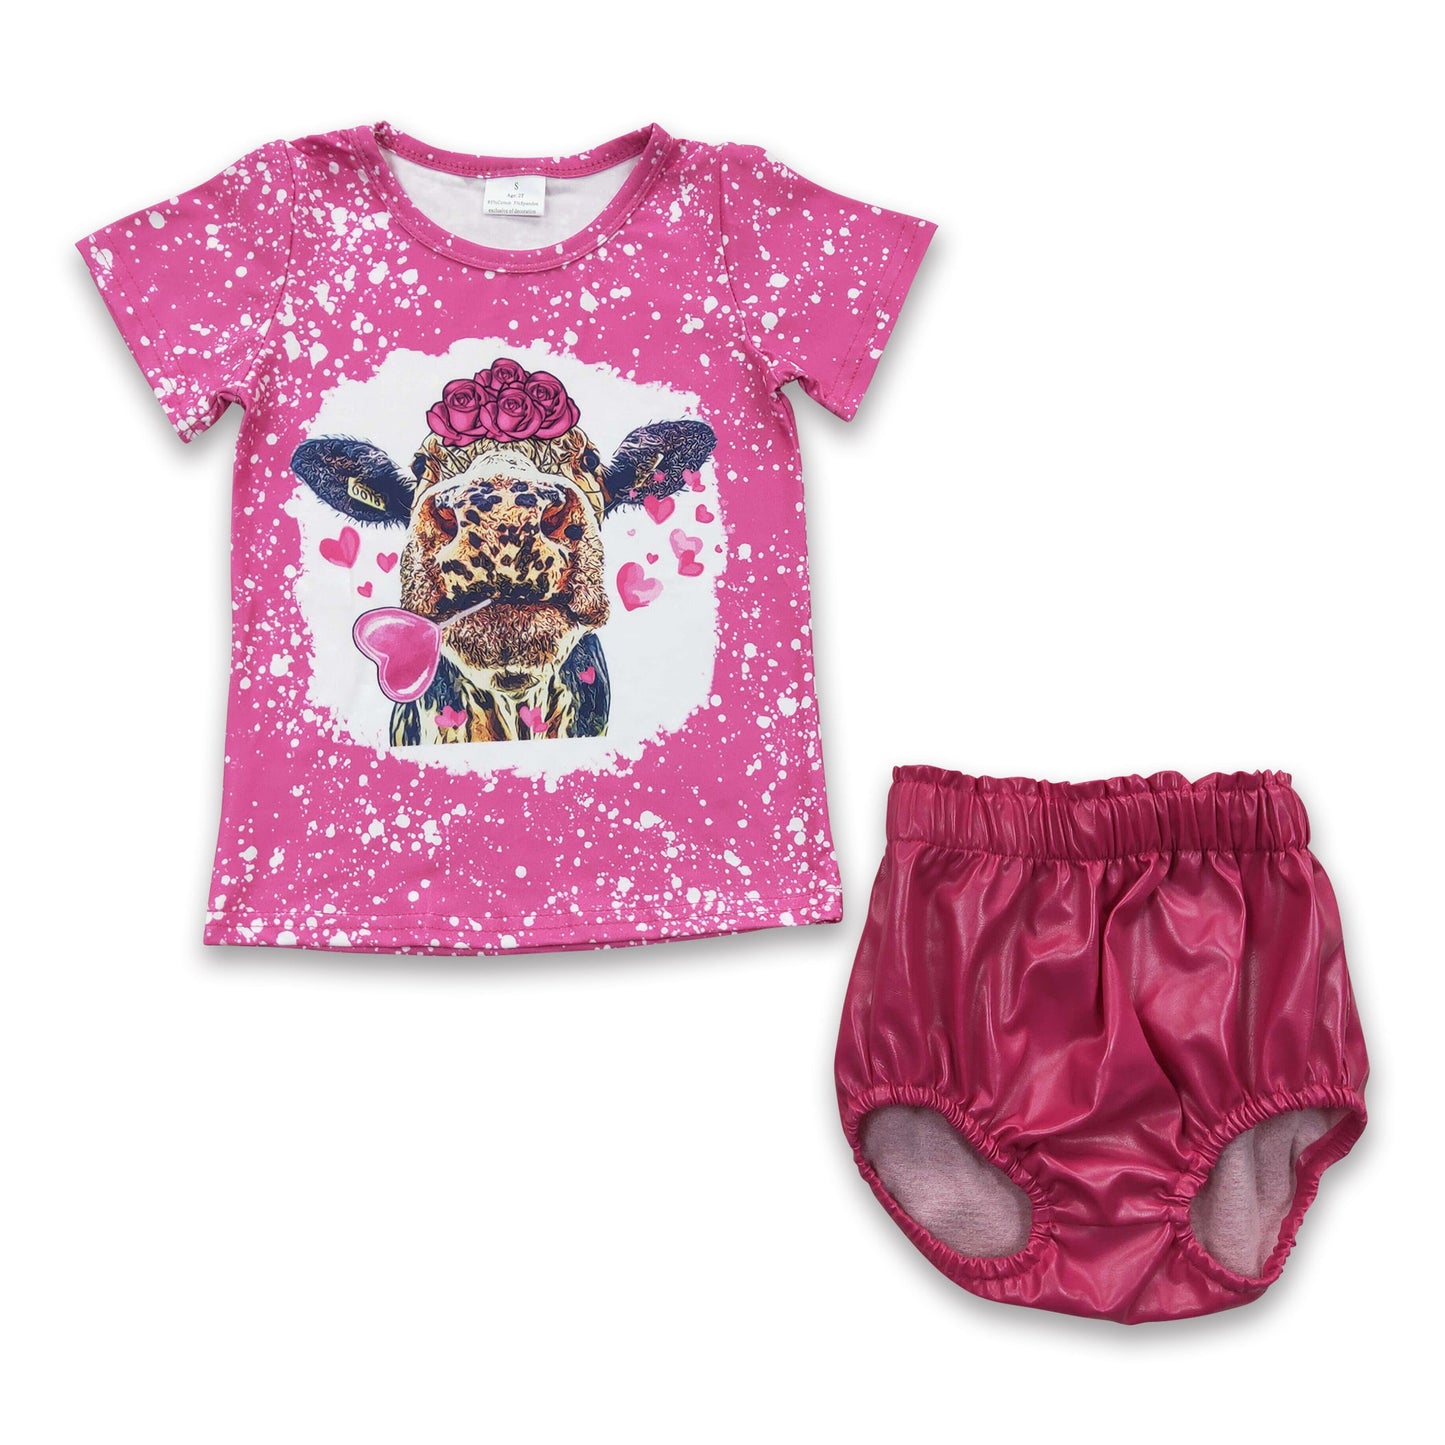 Cow shirt hot pink leather bummies girls outfits